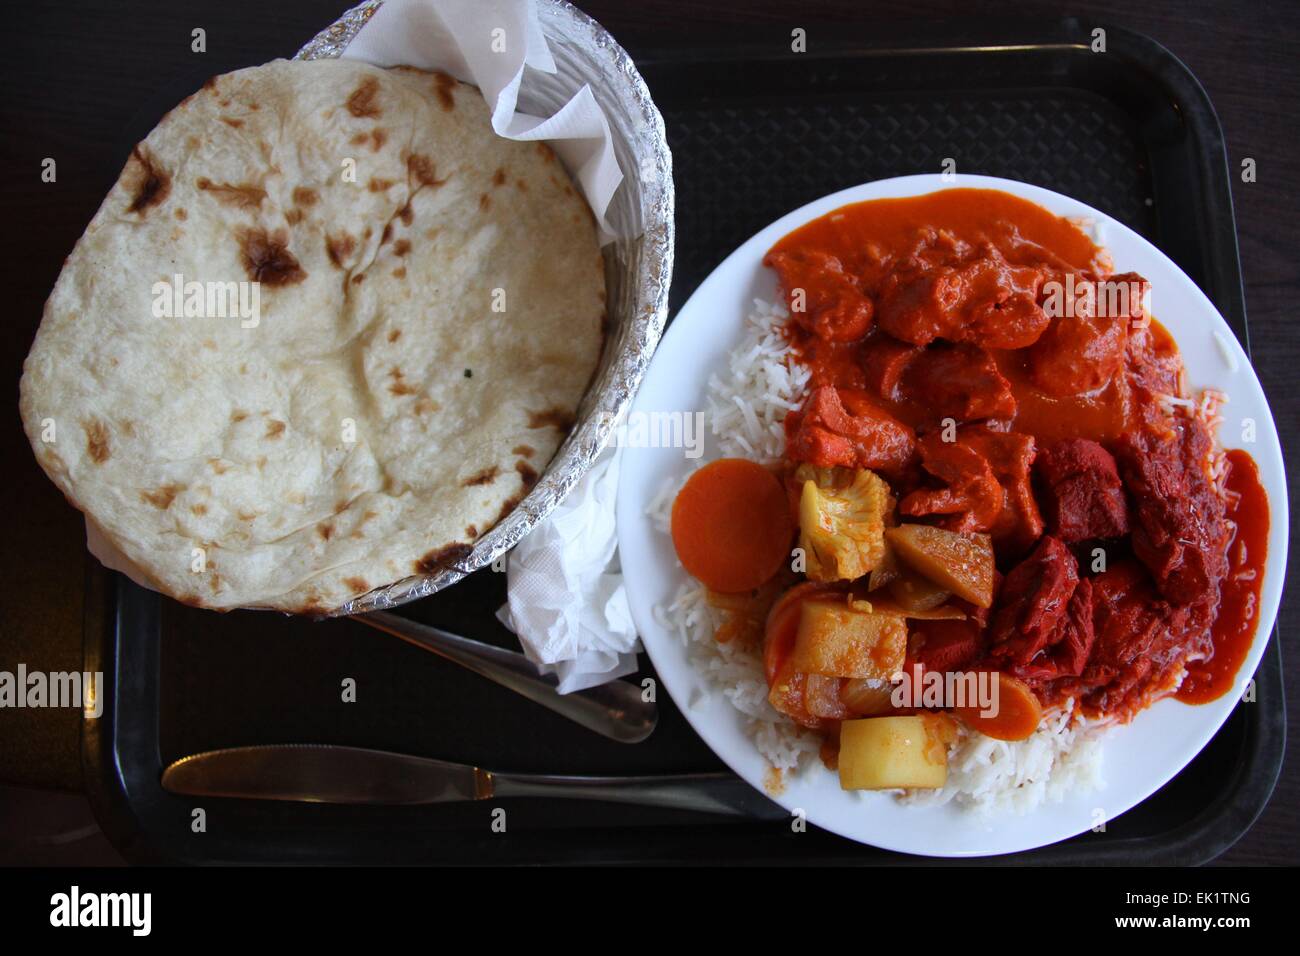 Indian food: beef vindaloo, butter chicken, vegetables and a popadam. Stock Photo